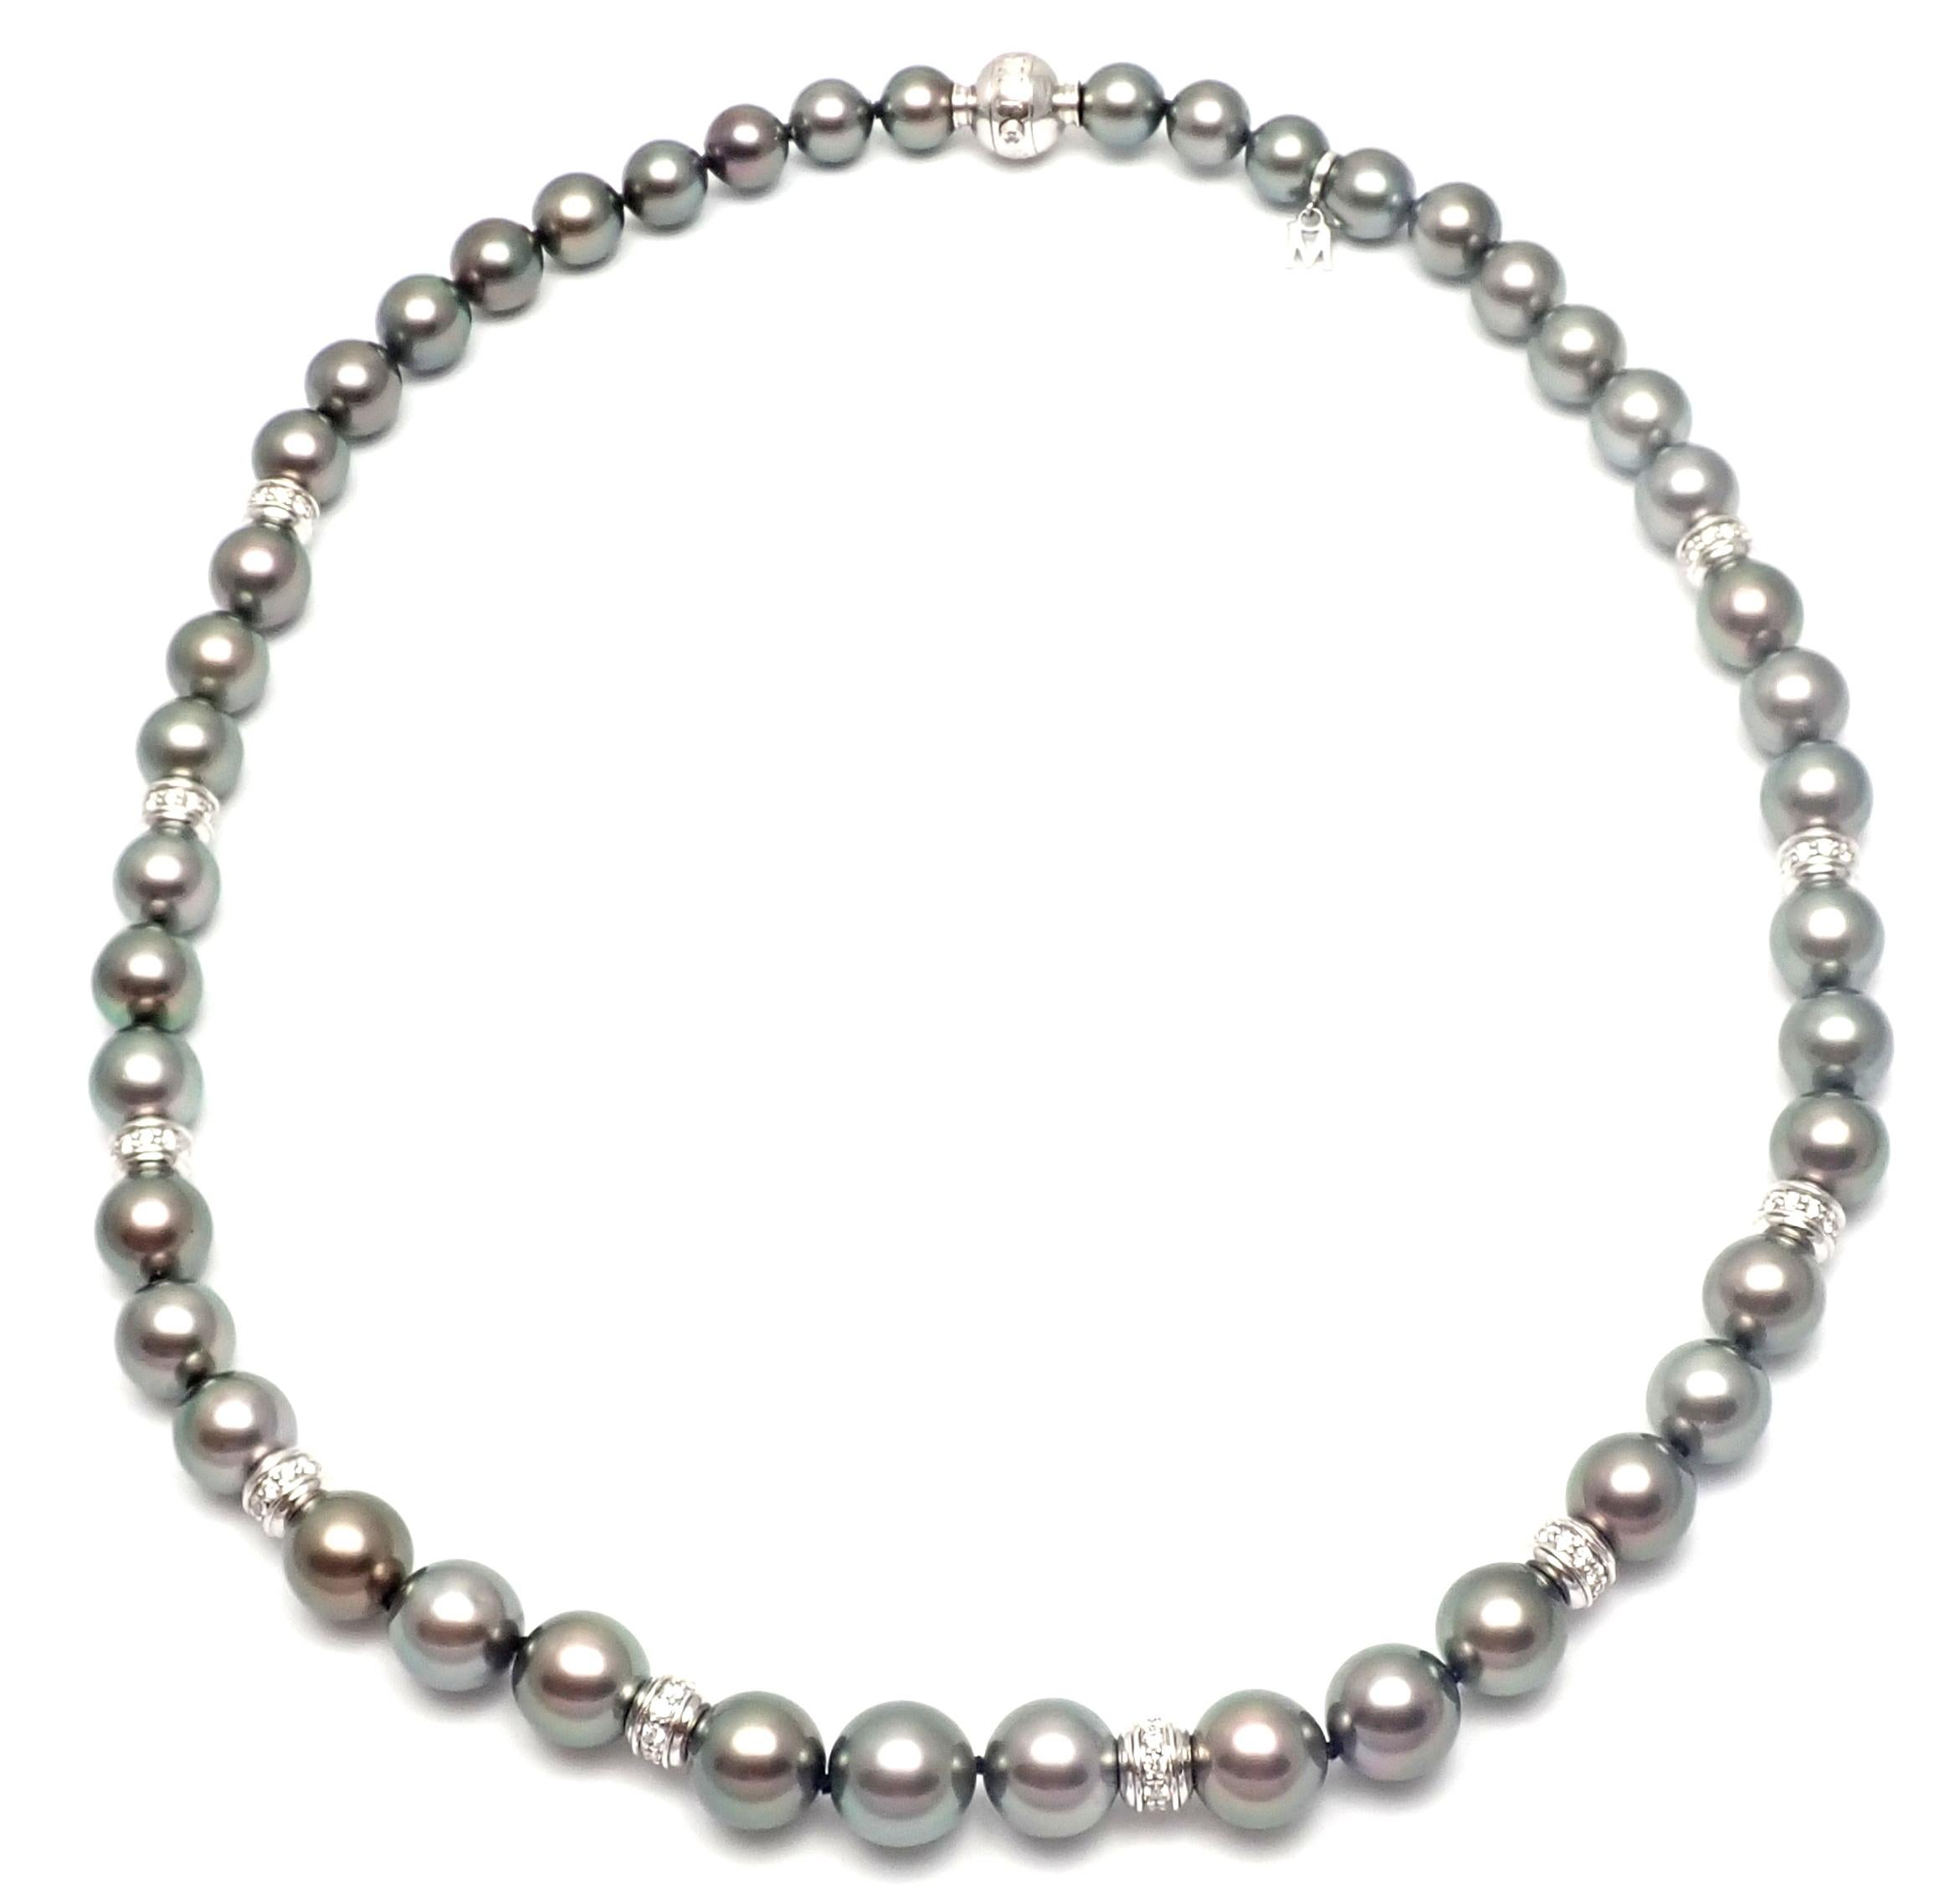 18k White Gold 10 Diamond Rondelles Tahitian Black South Sea Pearl Necklace by Mikimoto. 
With 10 diamond rondelles and 1 diamond in the lock
total weight approximately 2ct
45 Tahitian Black South Sea black pearls from 8mm to 10.5mm
This necklace